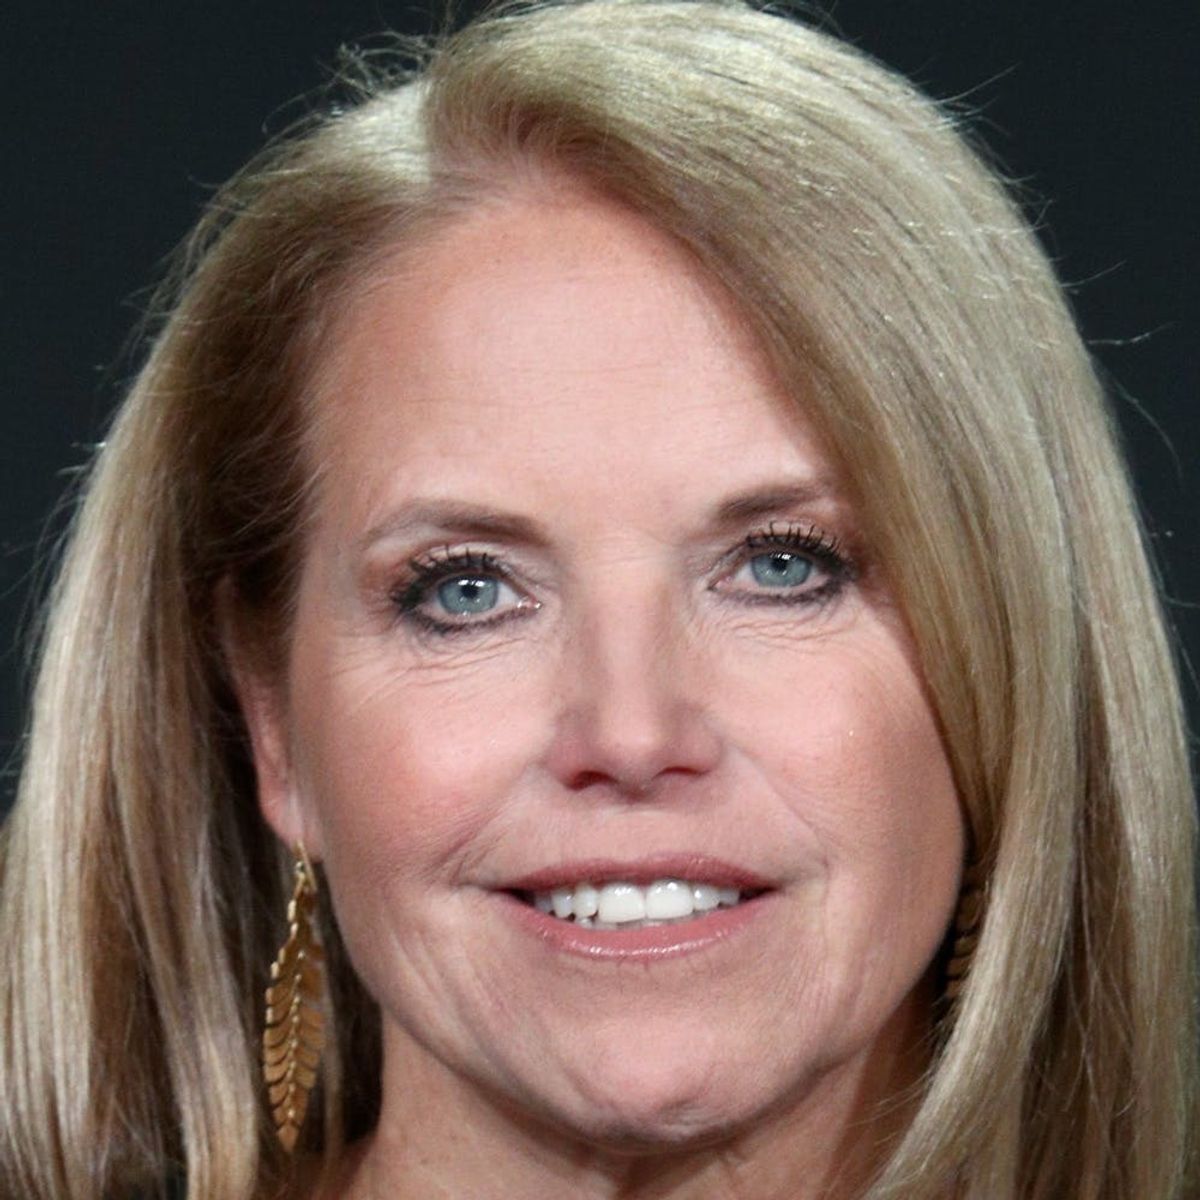 Katie Couric Just Broke Her Silence on Matt Lauer’s Sexual Misconduct Allegations